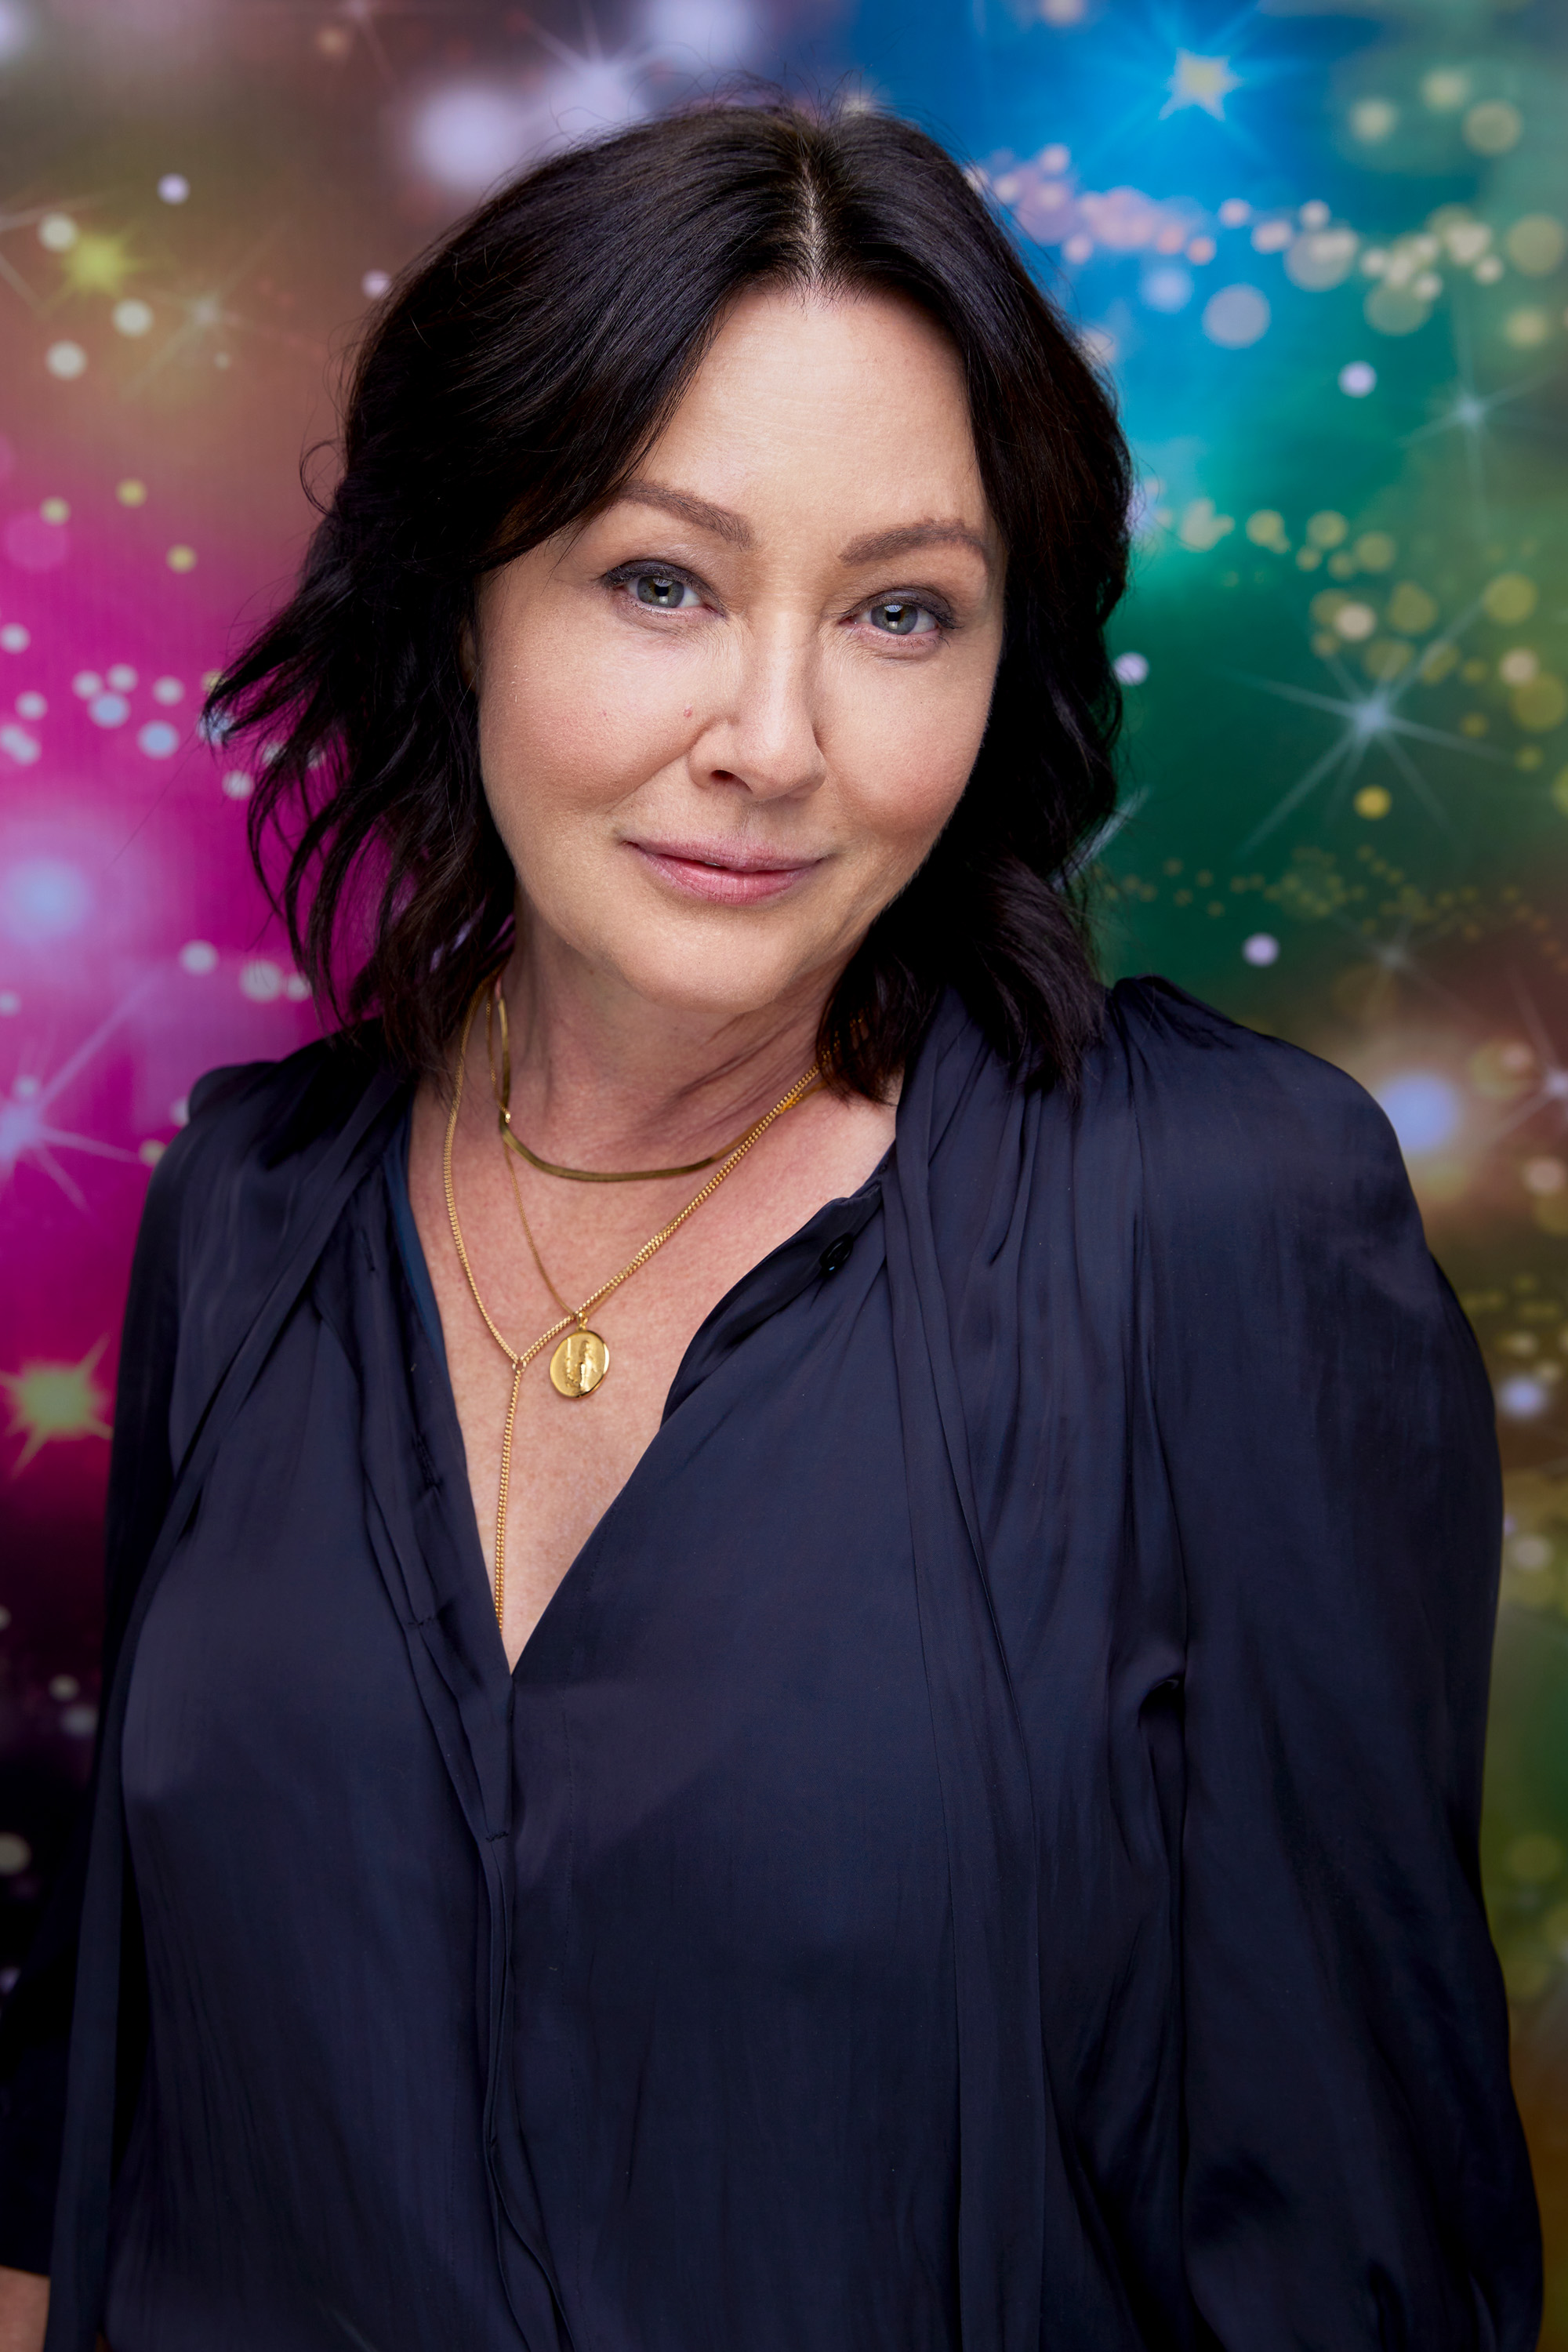 Shannen Doherty posing for a picture for a Season 3 episode of "The Kelly Clarkson Show" in 2021. | Source: Getty Images